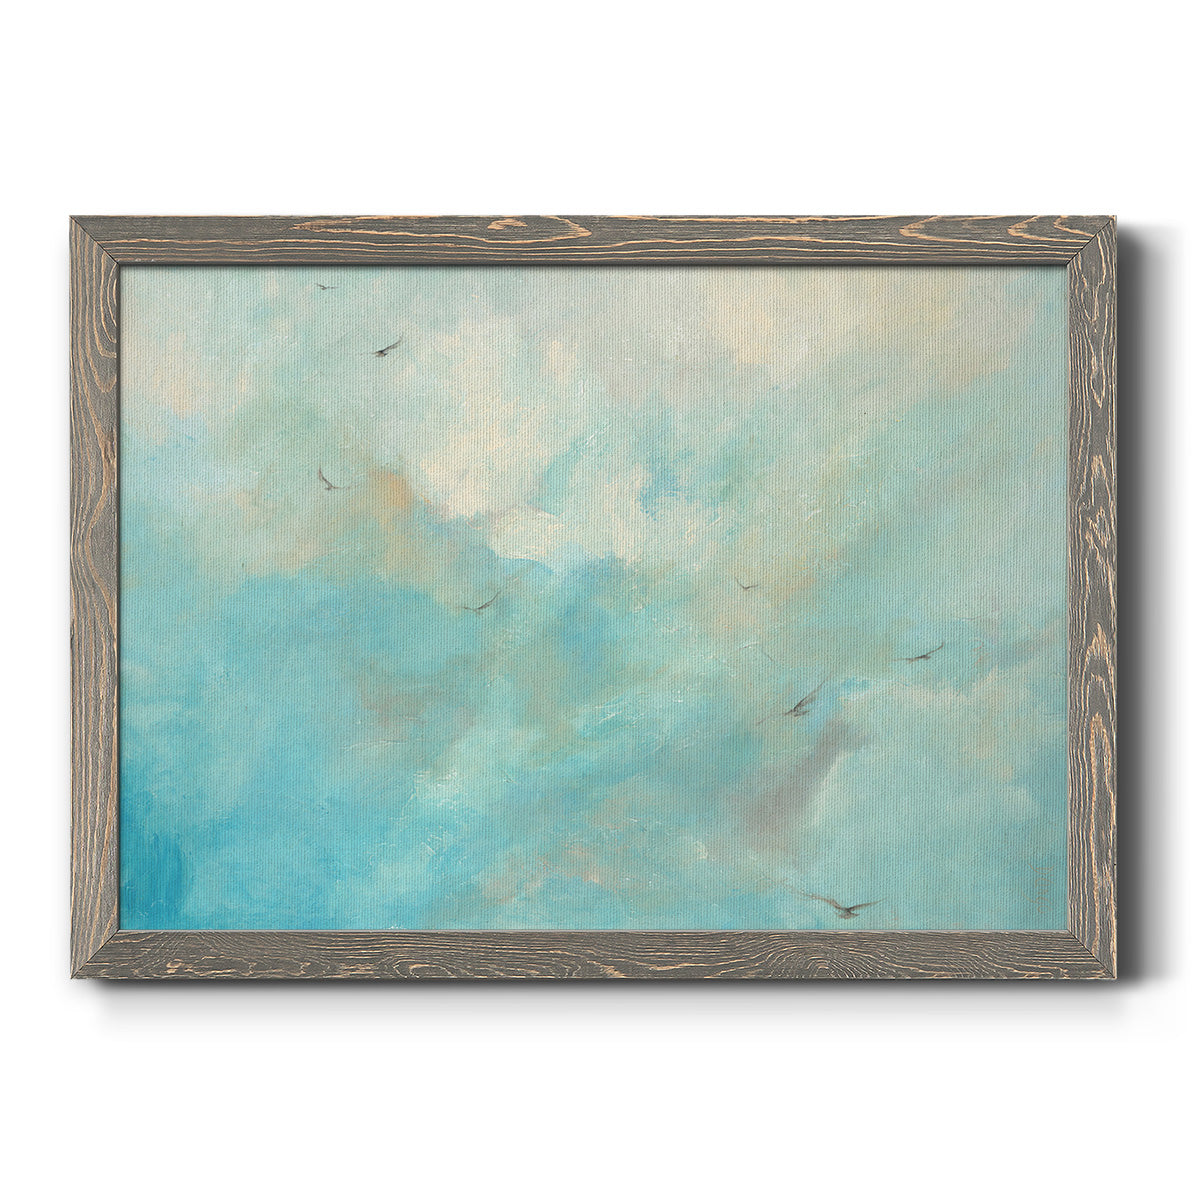 Flying Home -Premium Framed Canvas - Ready to Hang